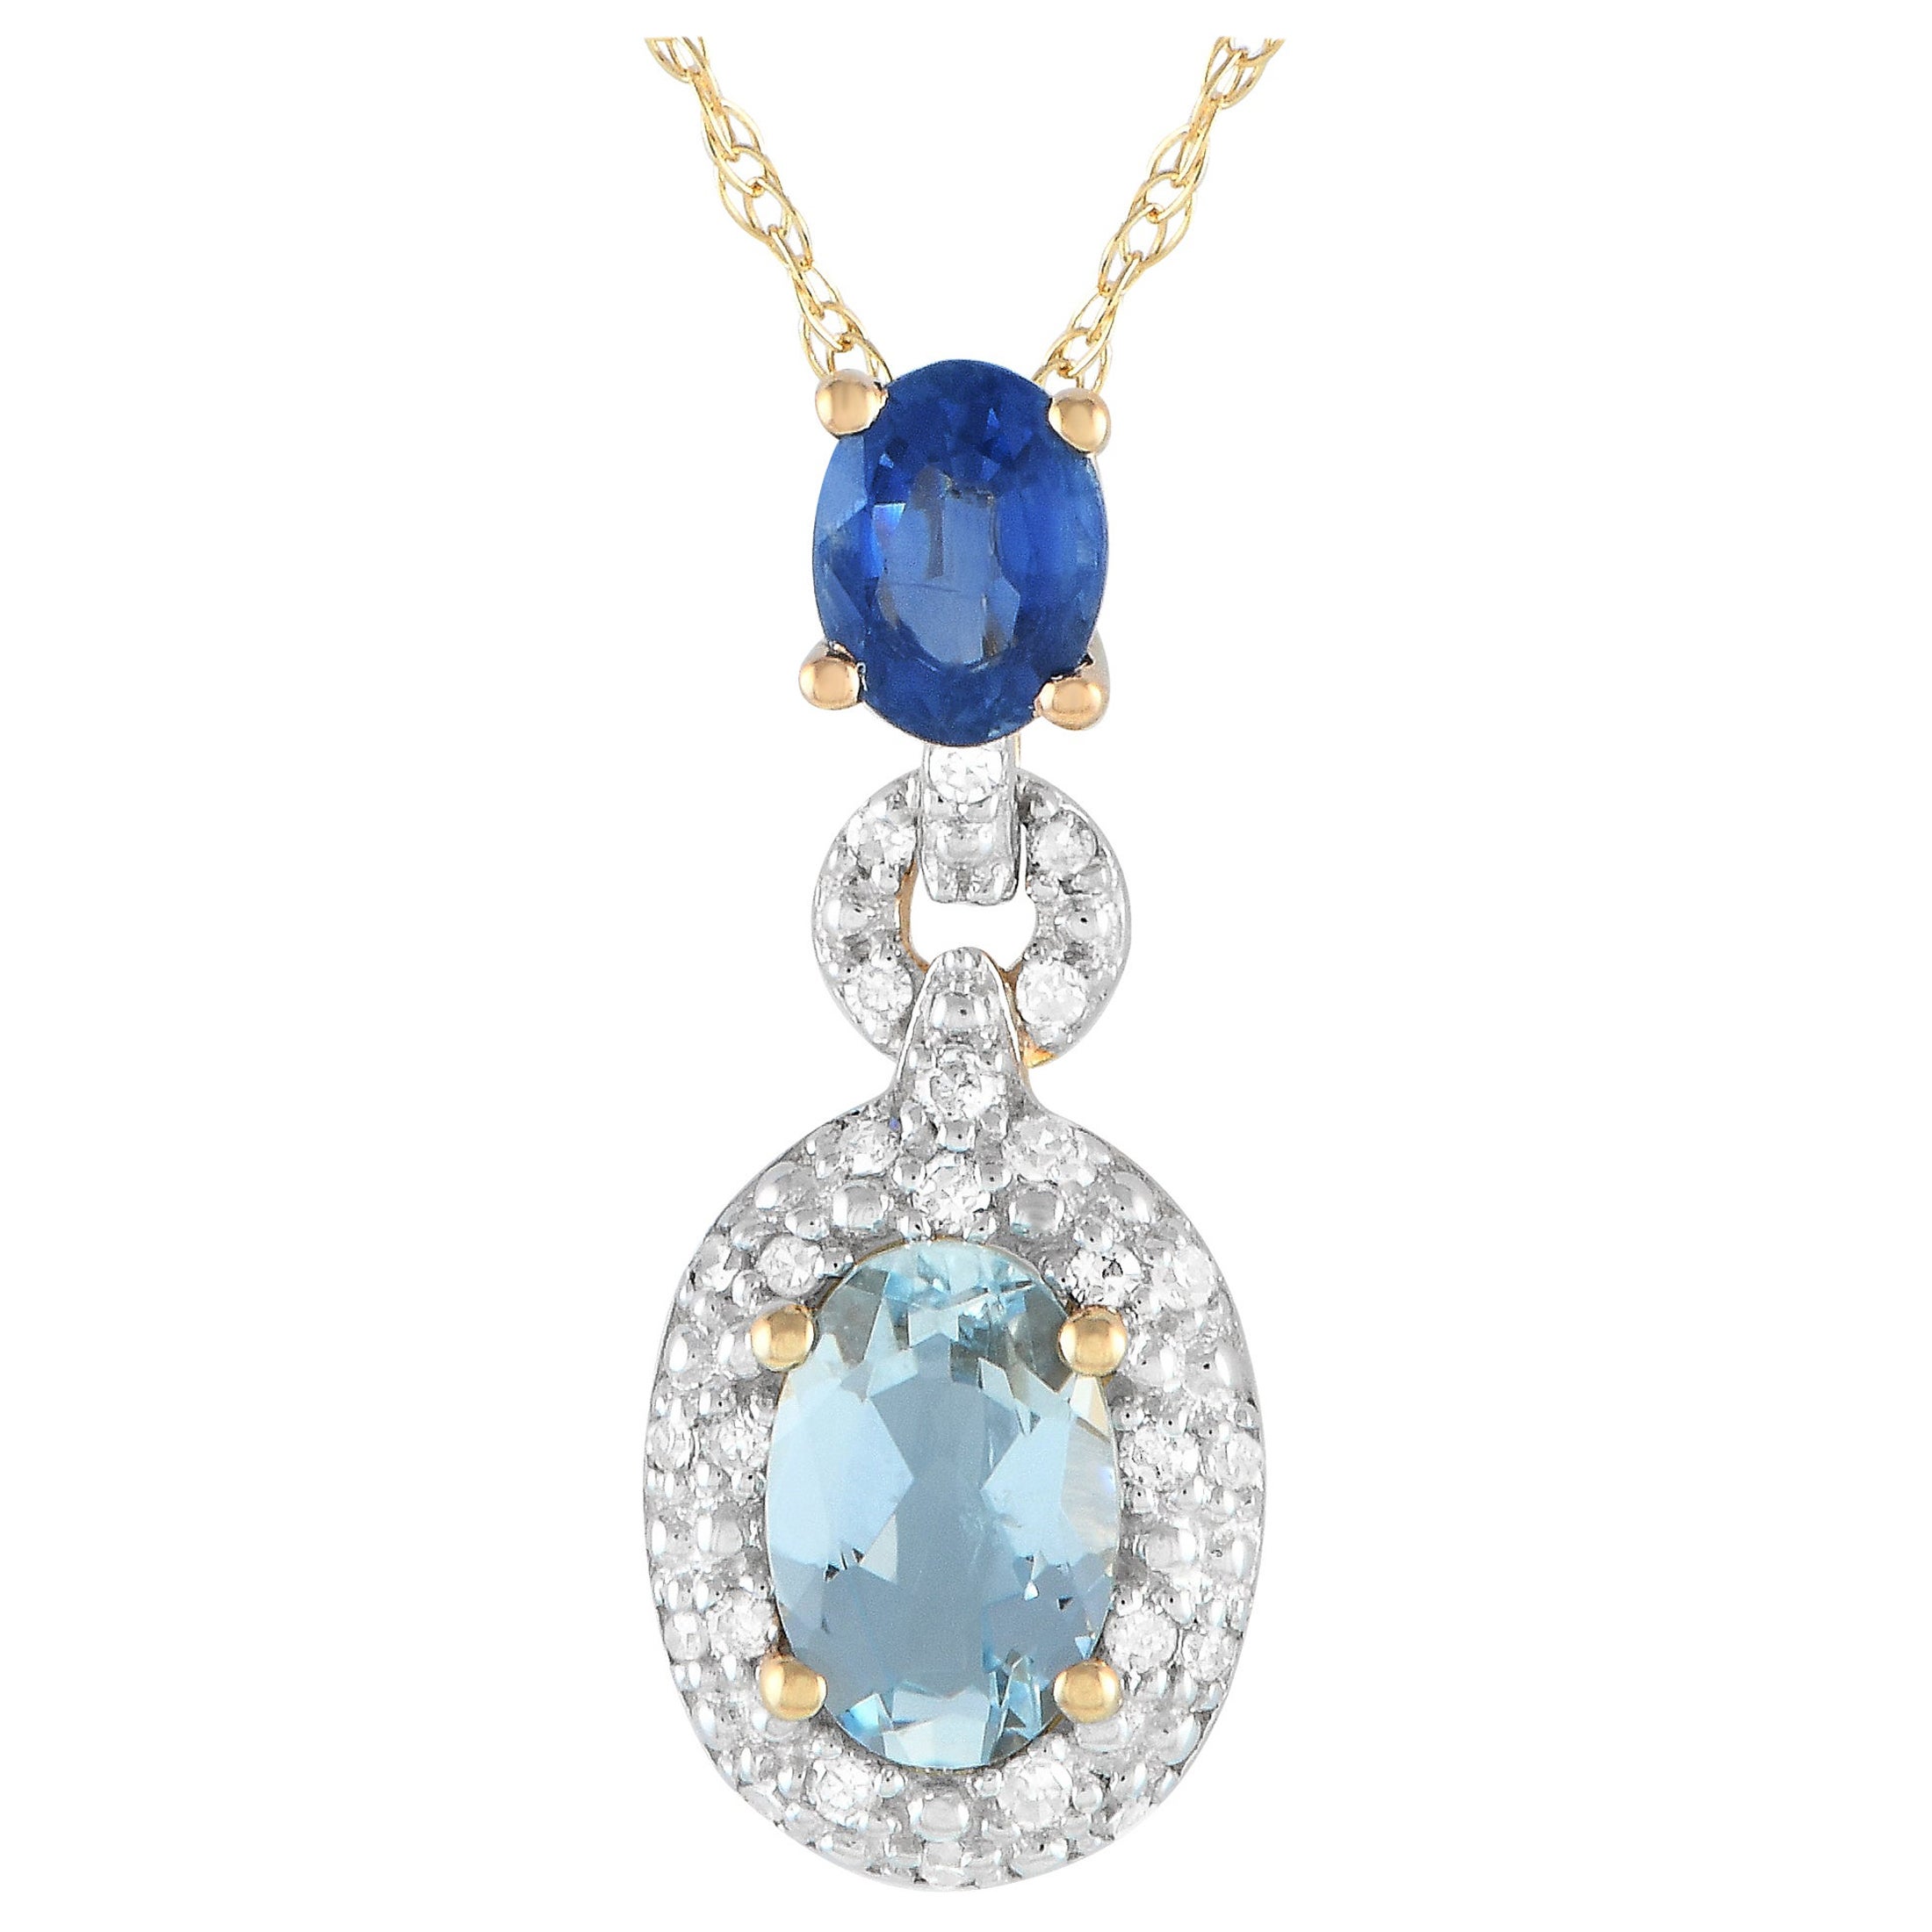 LB Exclusive 14K Yellow Gold 0.08ct Diamond, Aquamarine, Necklace PD4-16183YAQSA For Sale